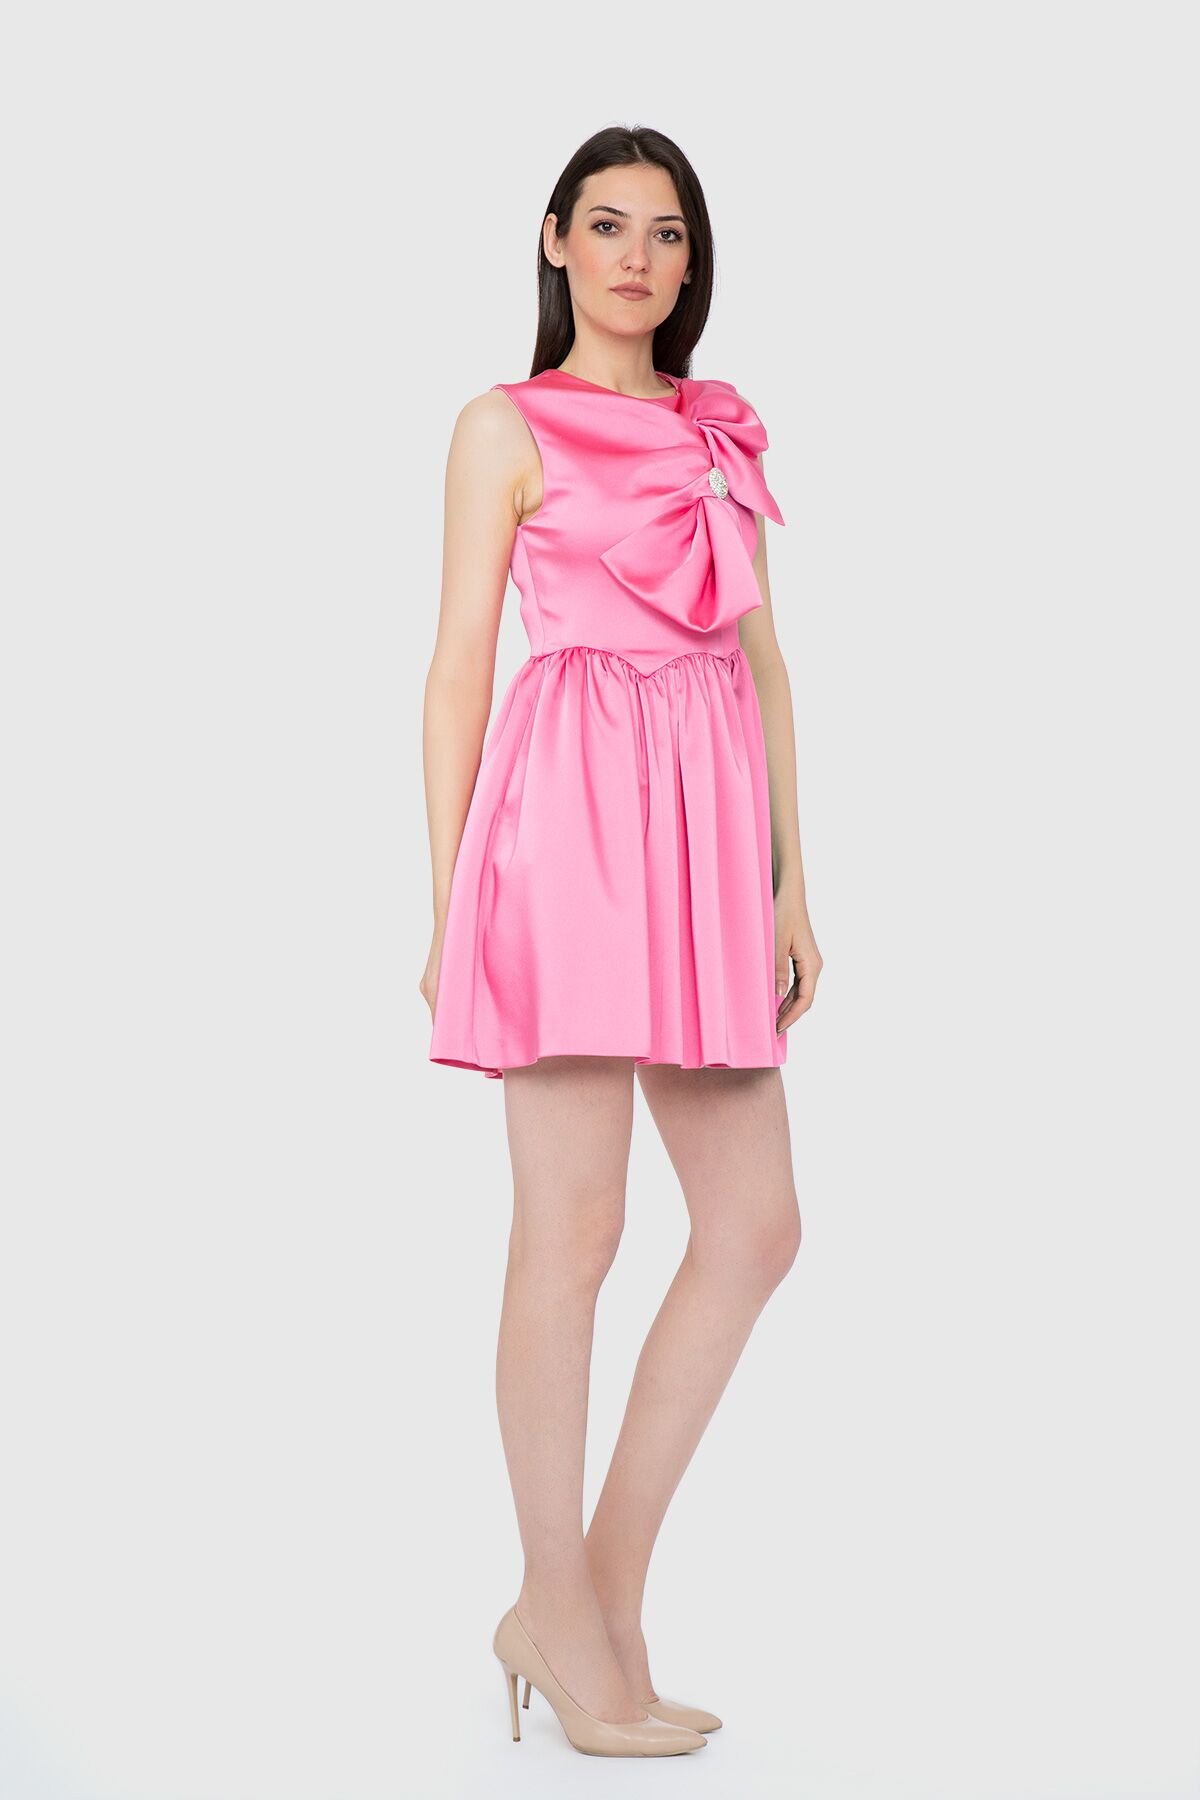 Accessory Detailed Pleated Mini Pink Dress